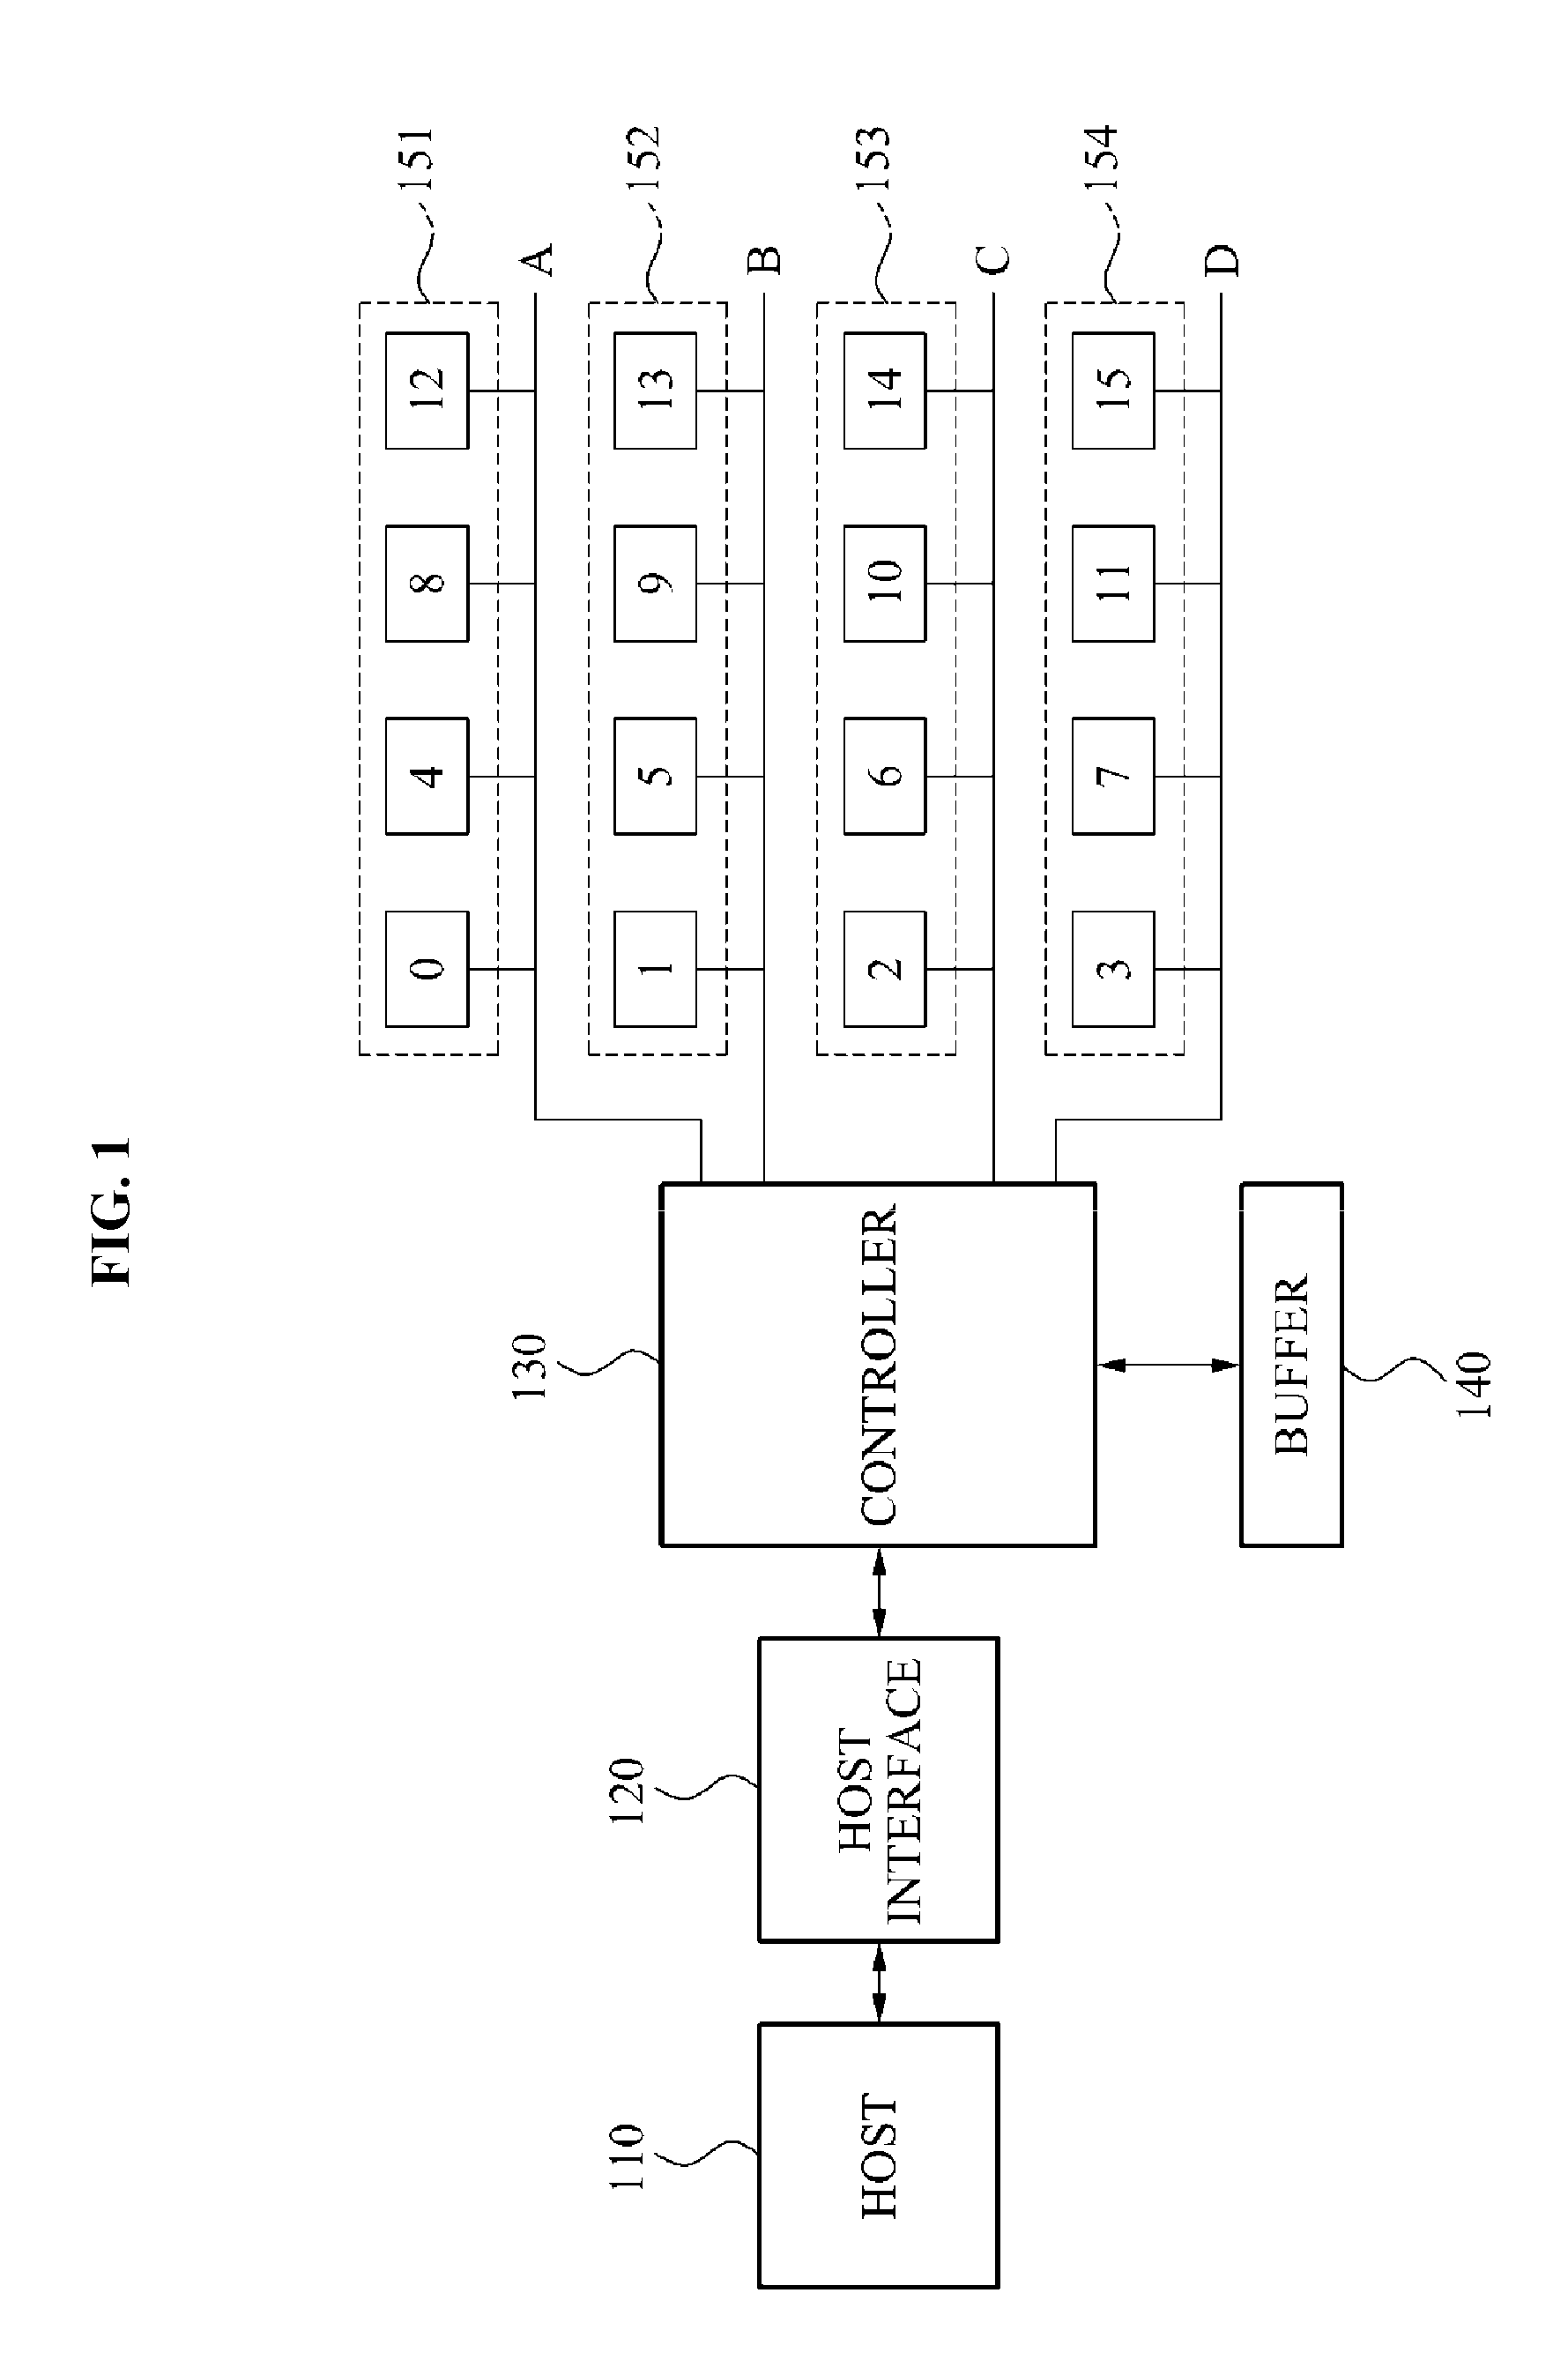 Controller for solid state disk which controls access to memory bank